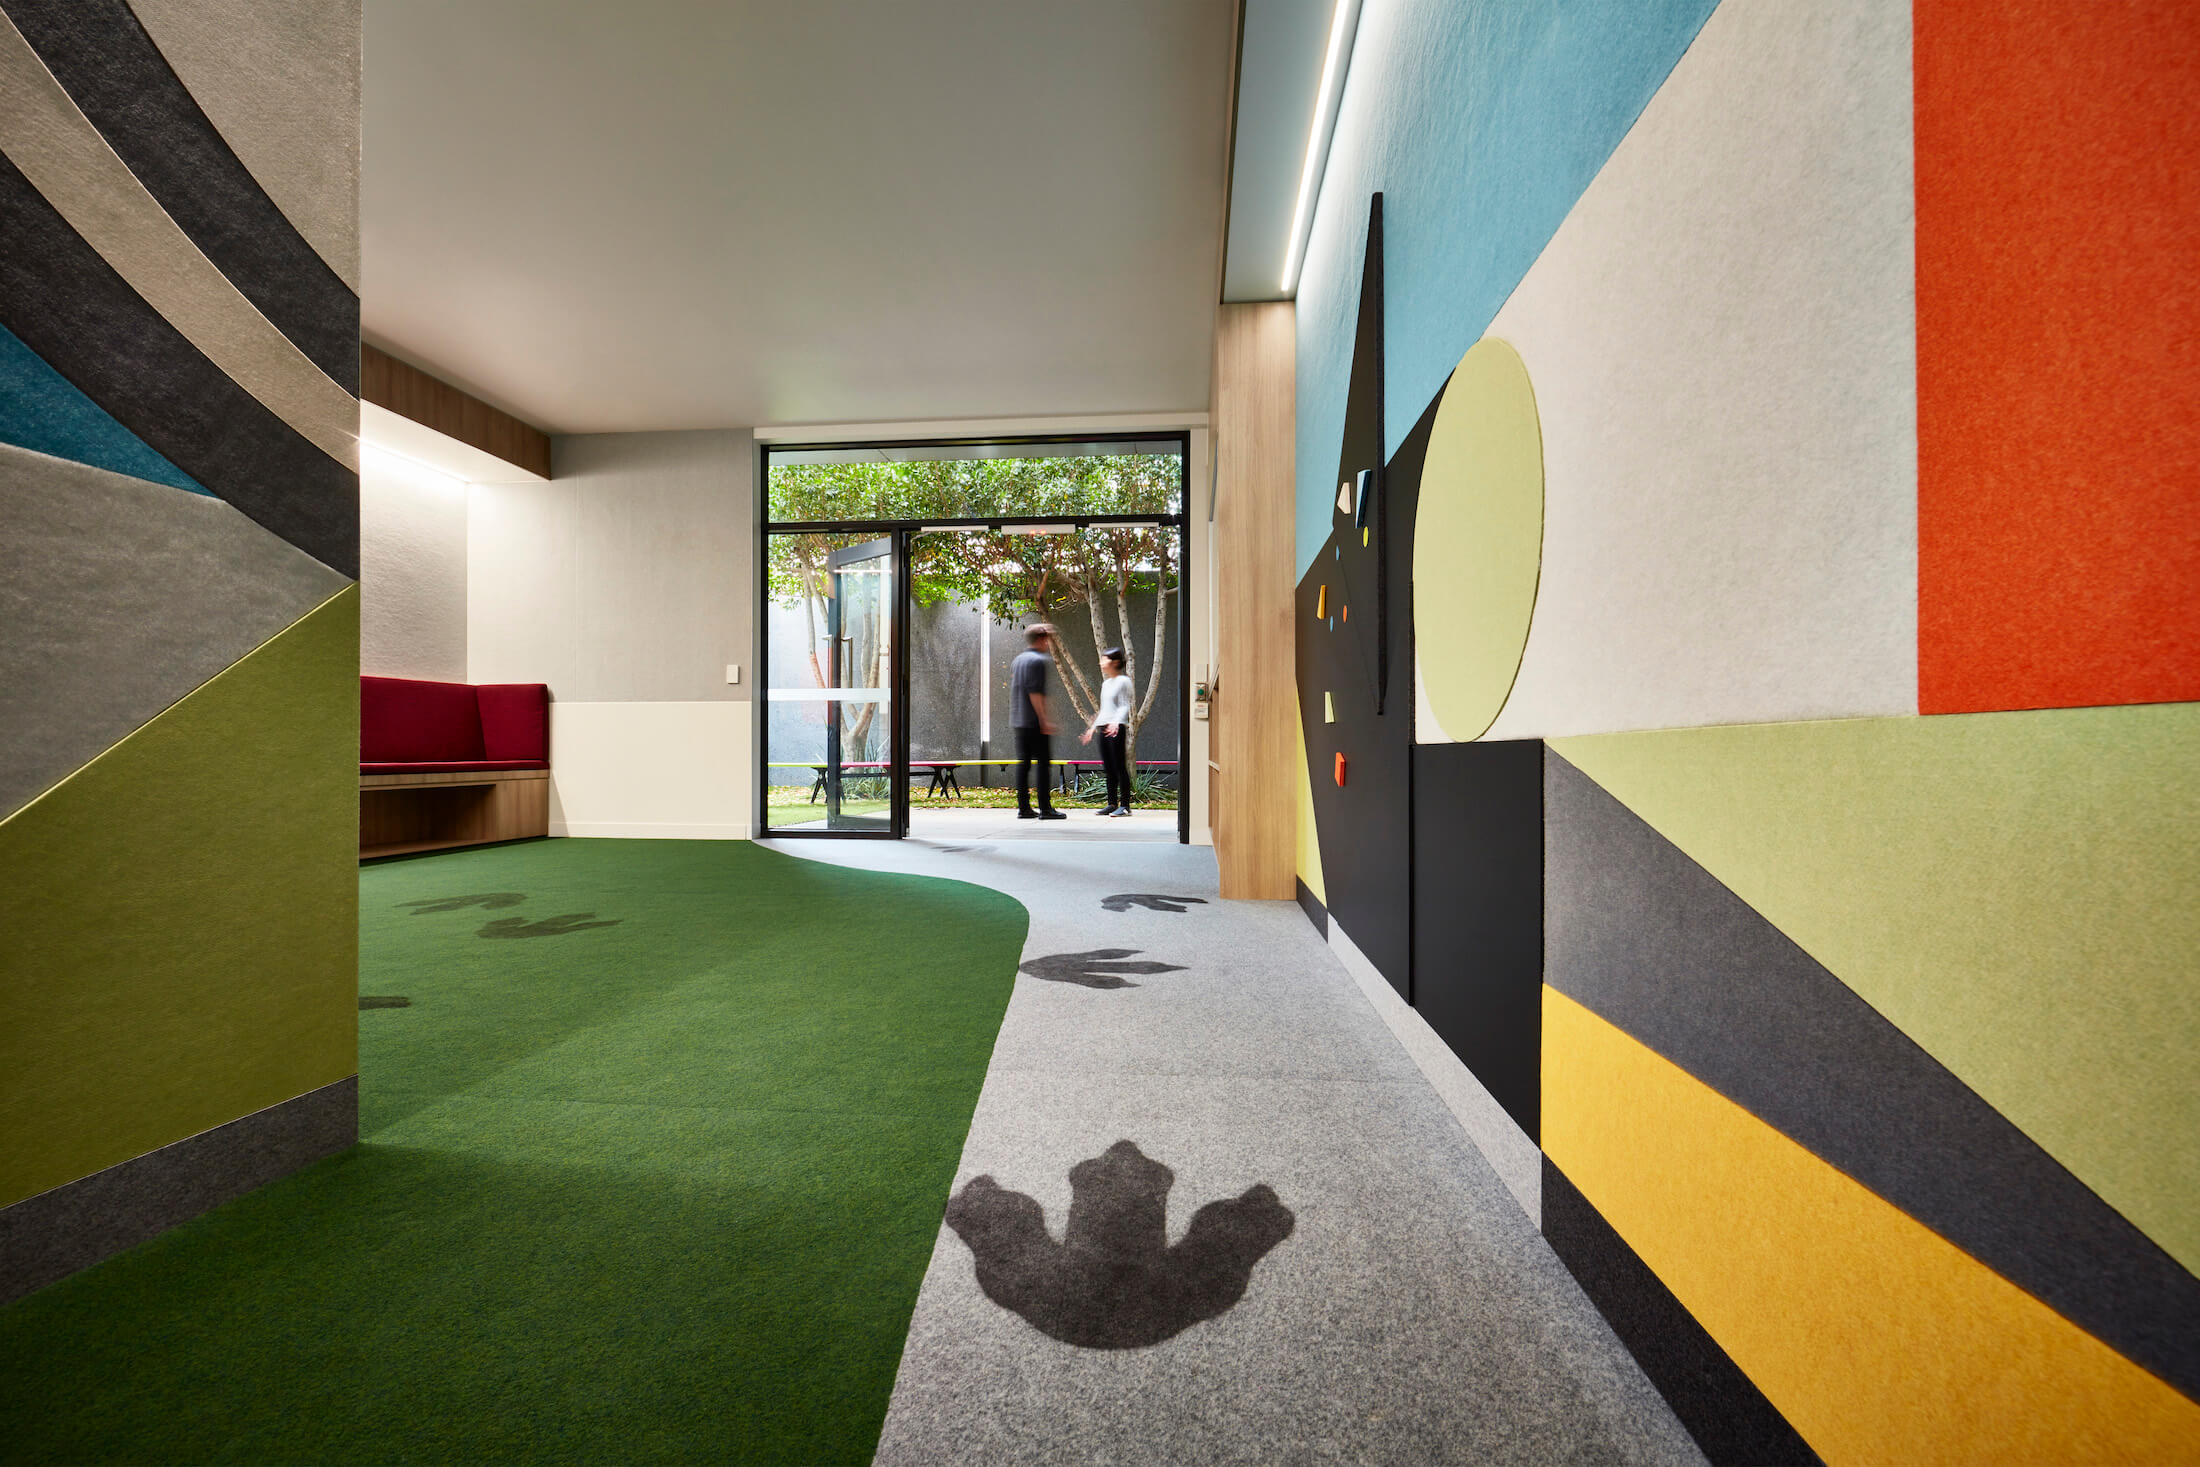 Felt acoustic wall panels in colourful patterns in hallway between court spaces and leafy courtyard